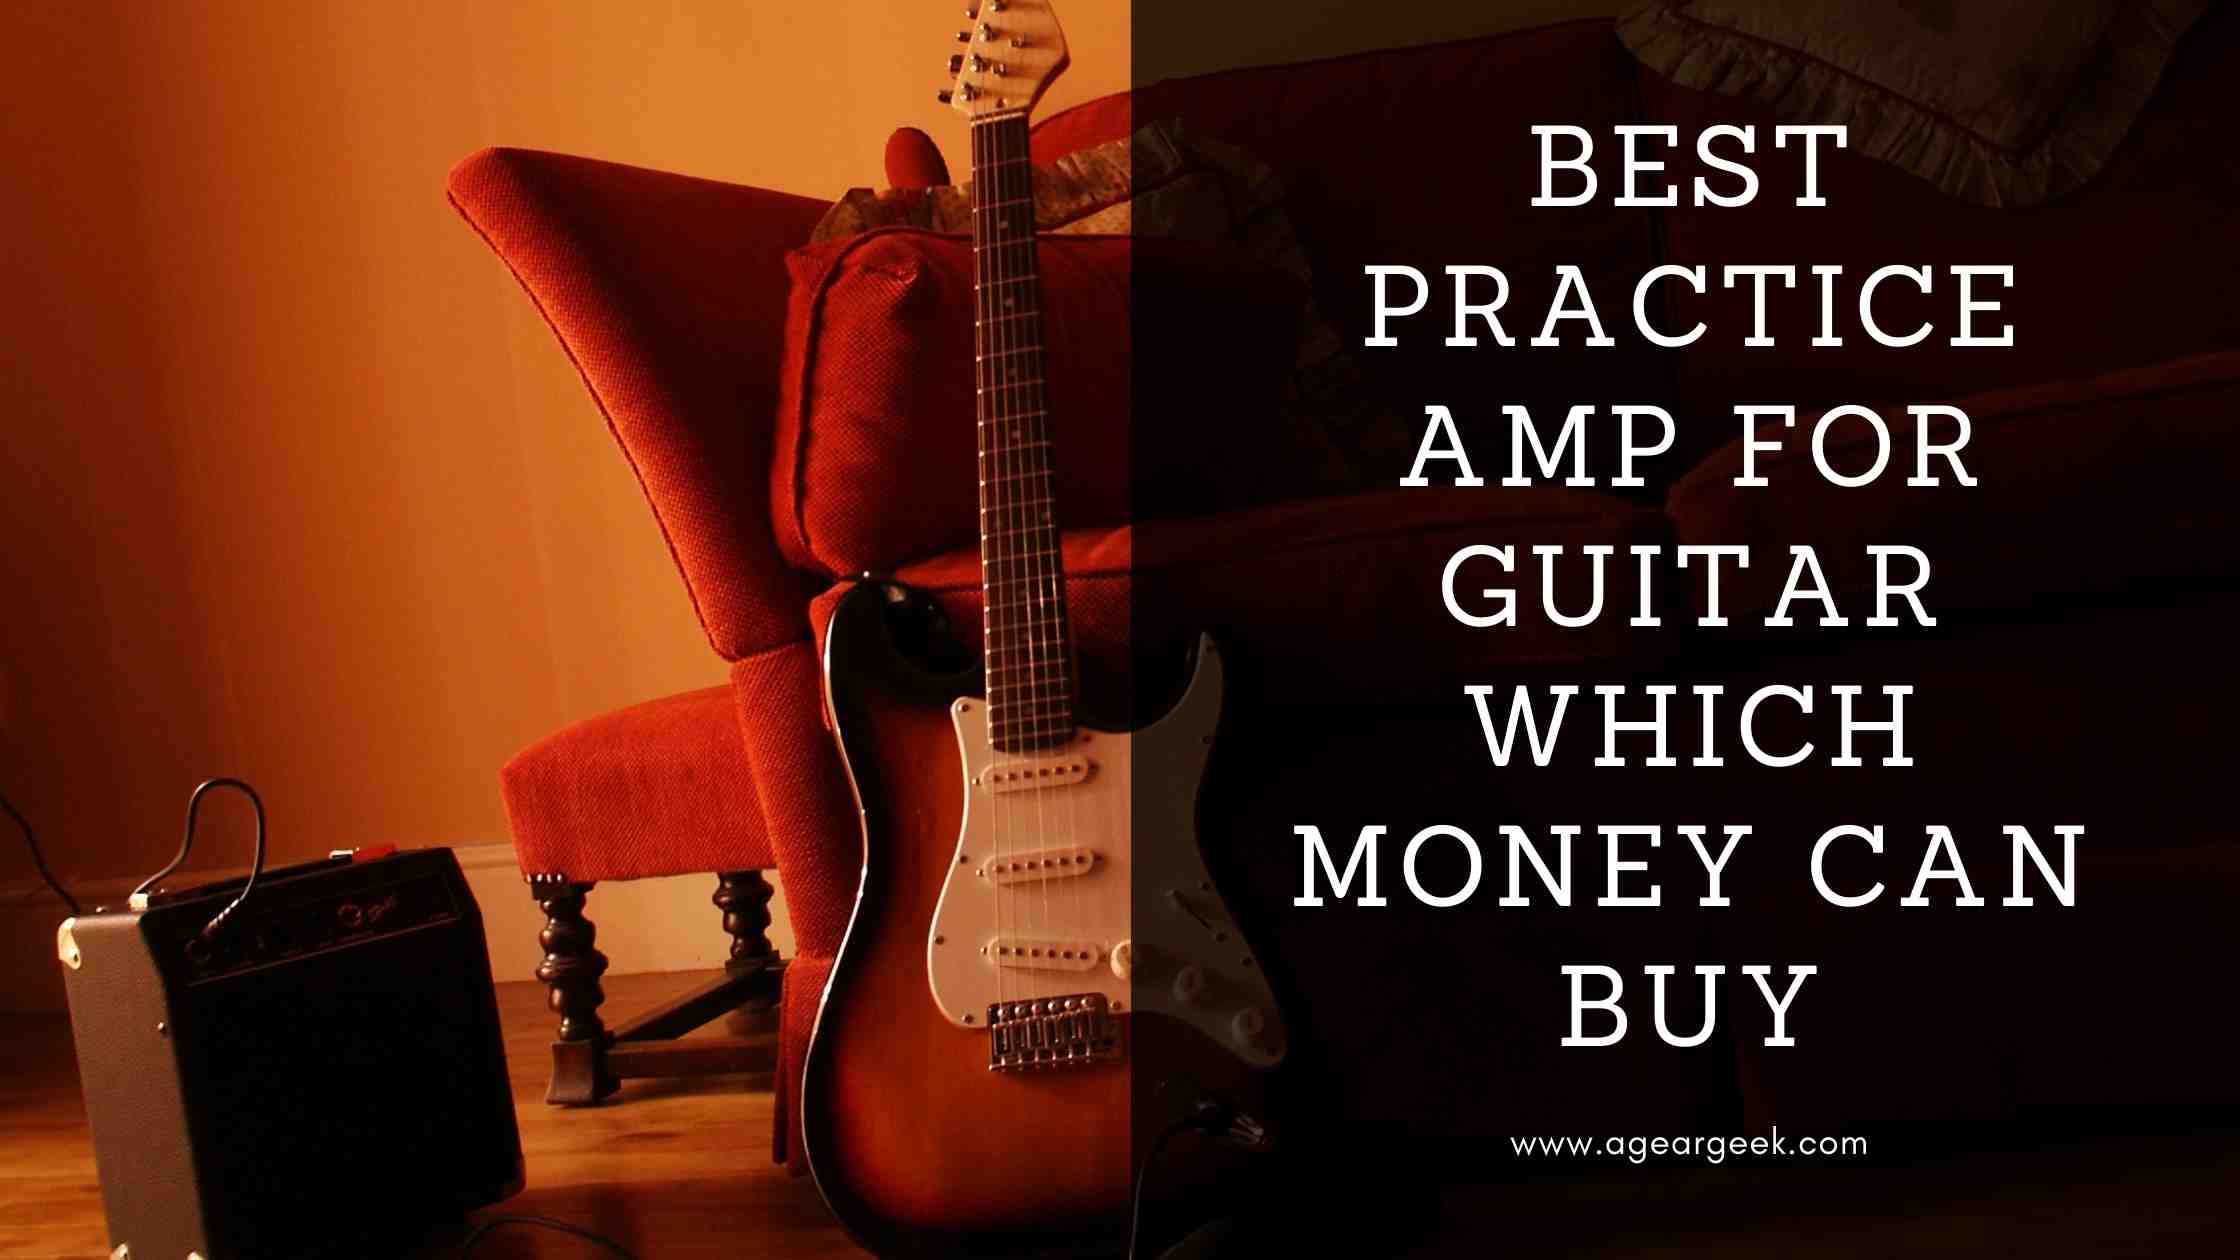 Best Practice Amp for Guitar which money can buy